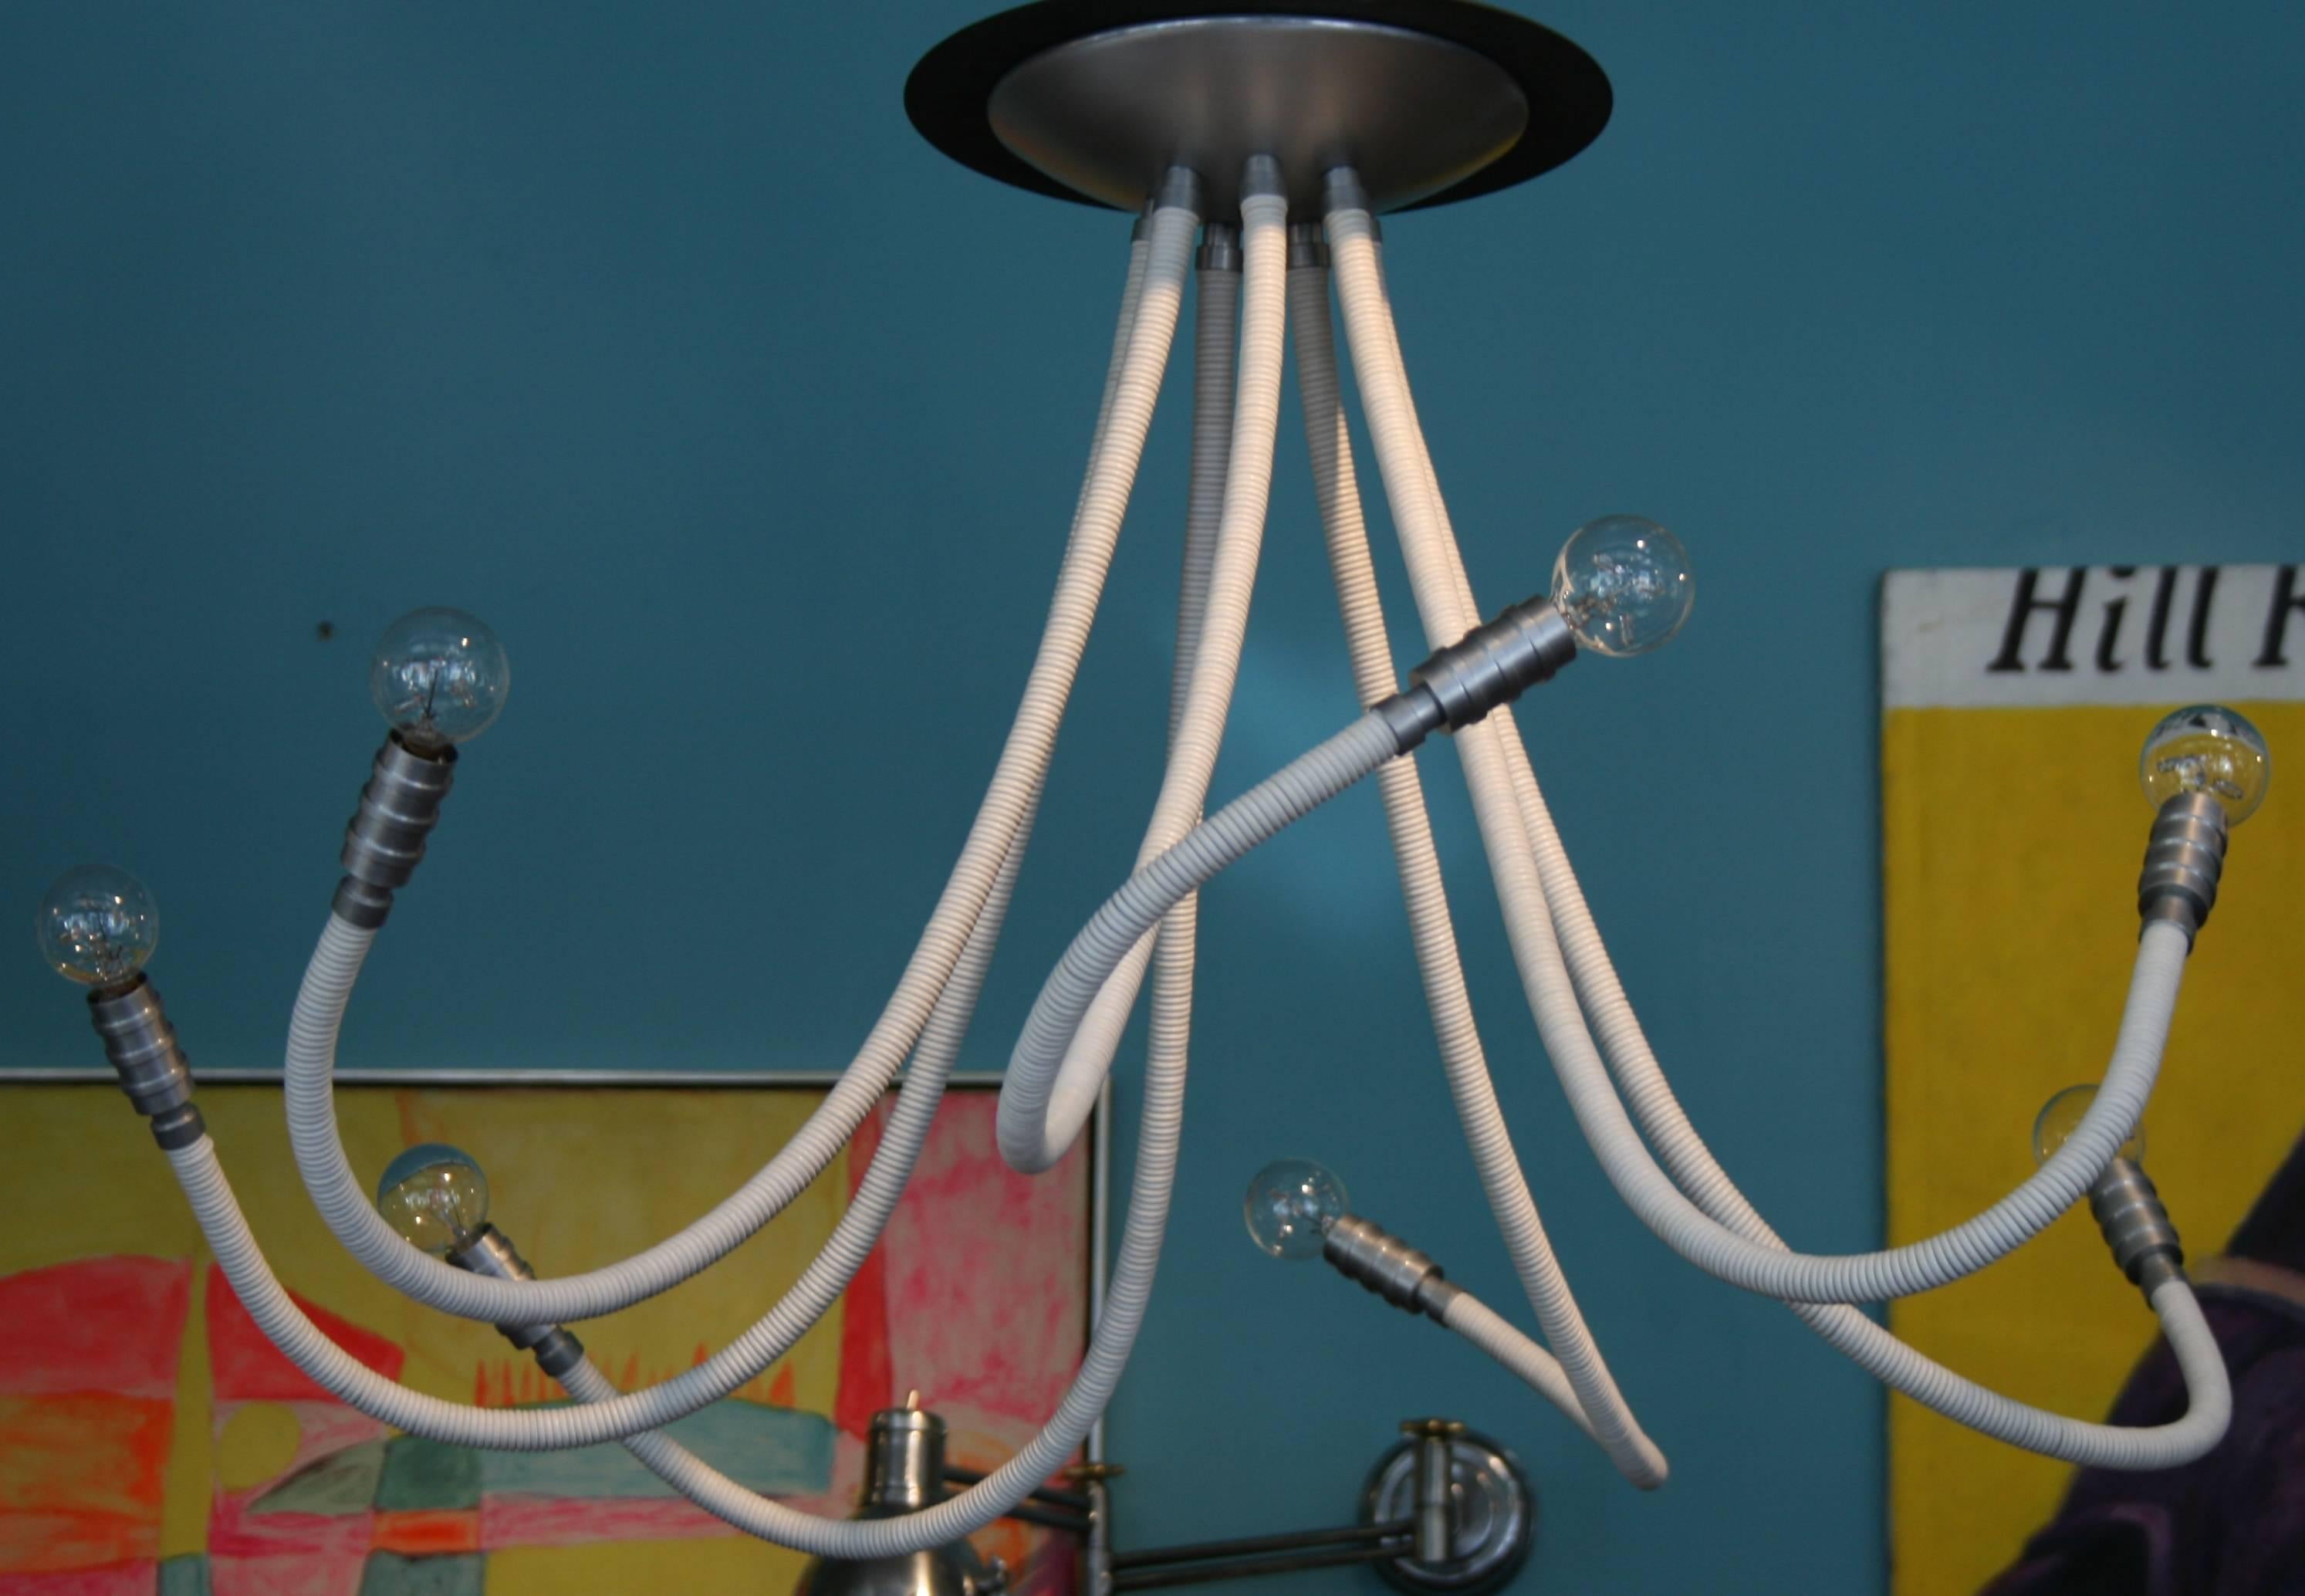 Matte metal chandelier with seven adjustable arms wrapped in white leather. Also available in other colors, metal finishes and custom configurations.

Avantgarden Ltd. cultivates unexpected and exceptional lighting, furniture and design.  To view